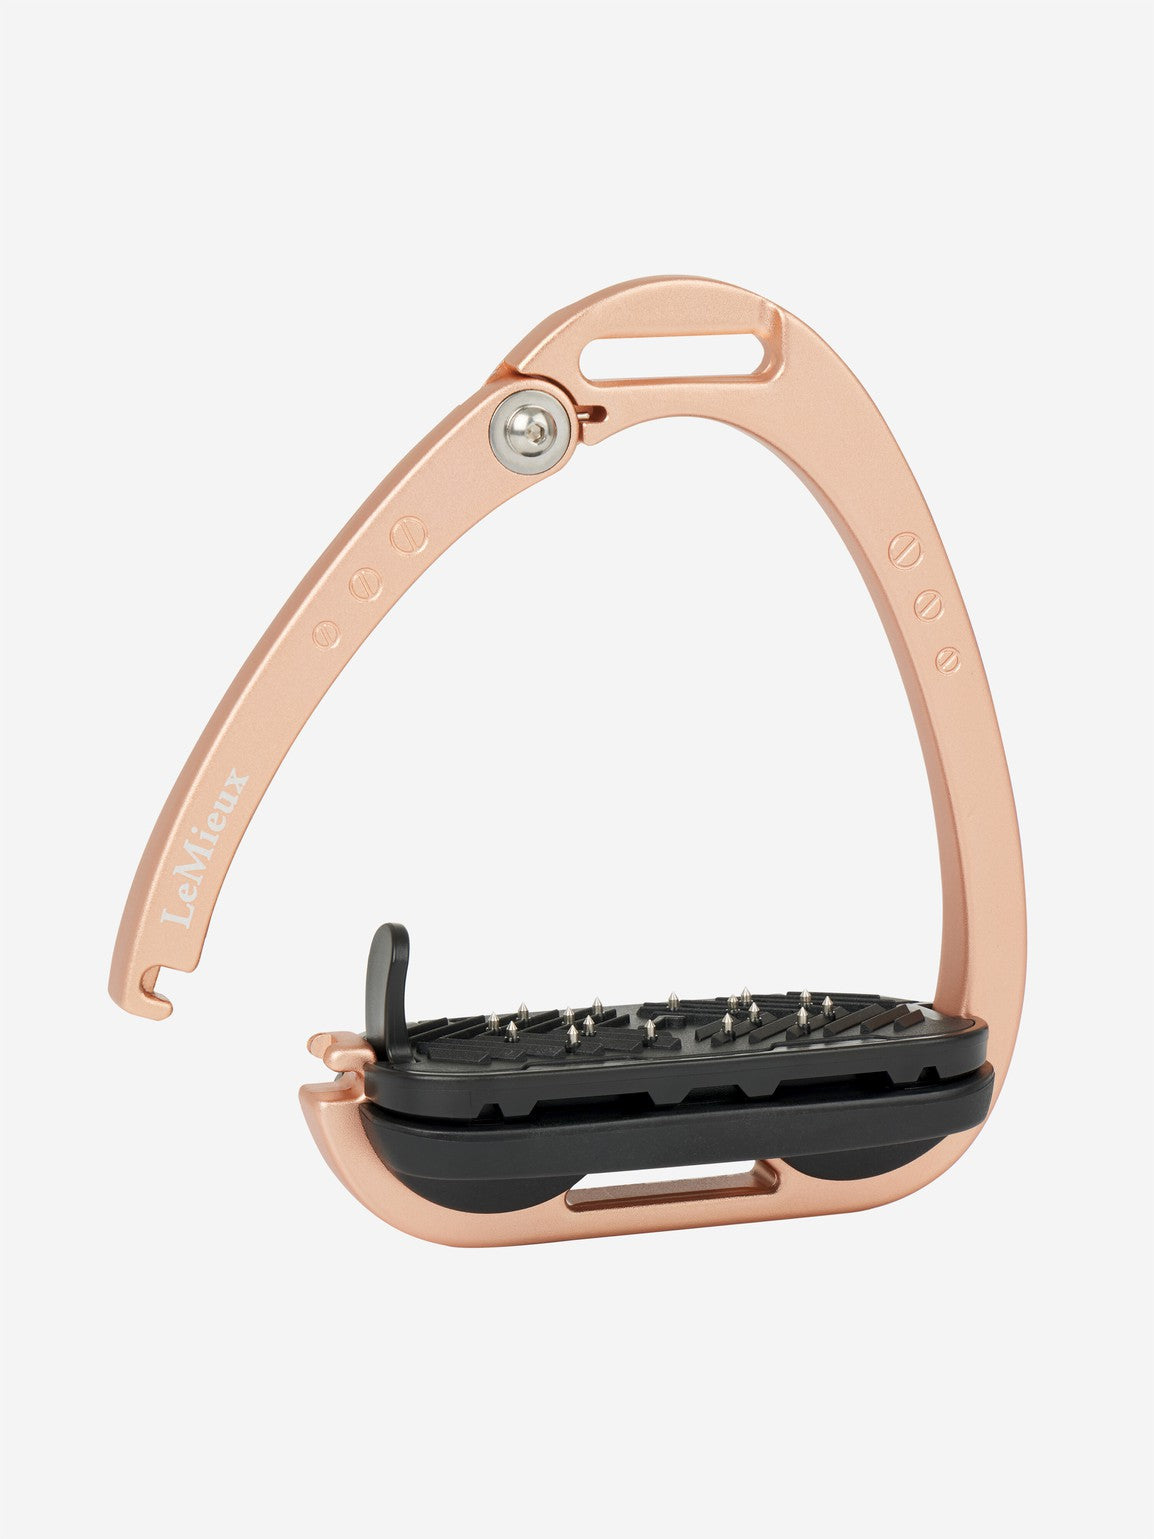 Rose gold-colored stirrup leathers with black tread isolated on white.